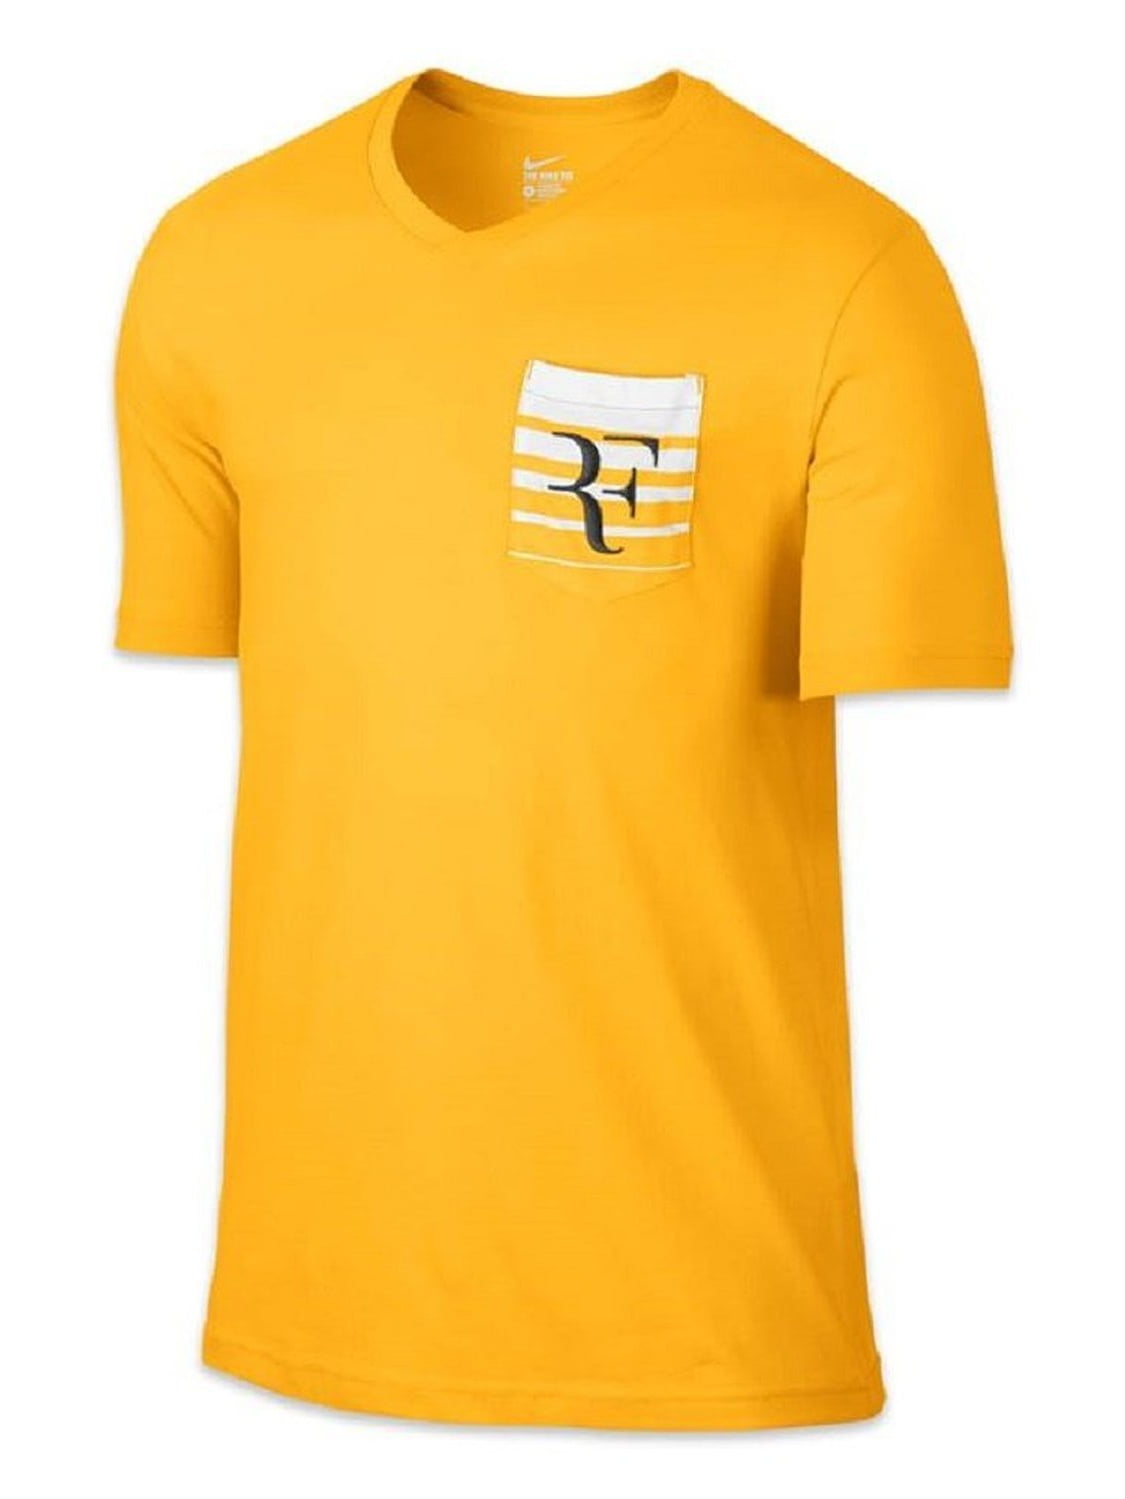 Roger Federer Shirt : Shoes & Fashion Online With Free Shipping ...